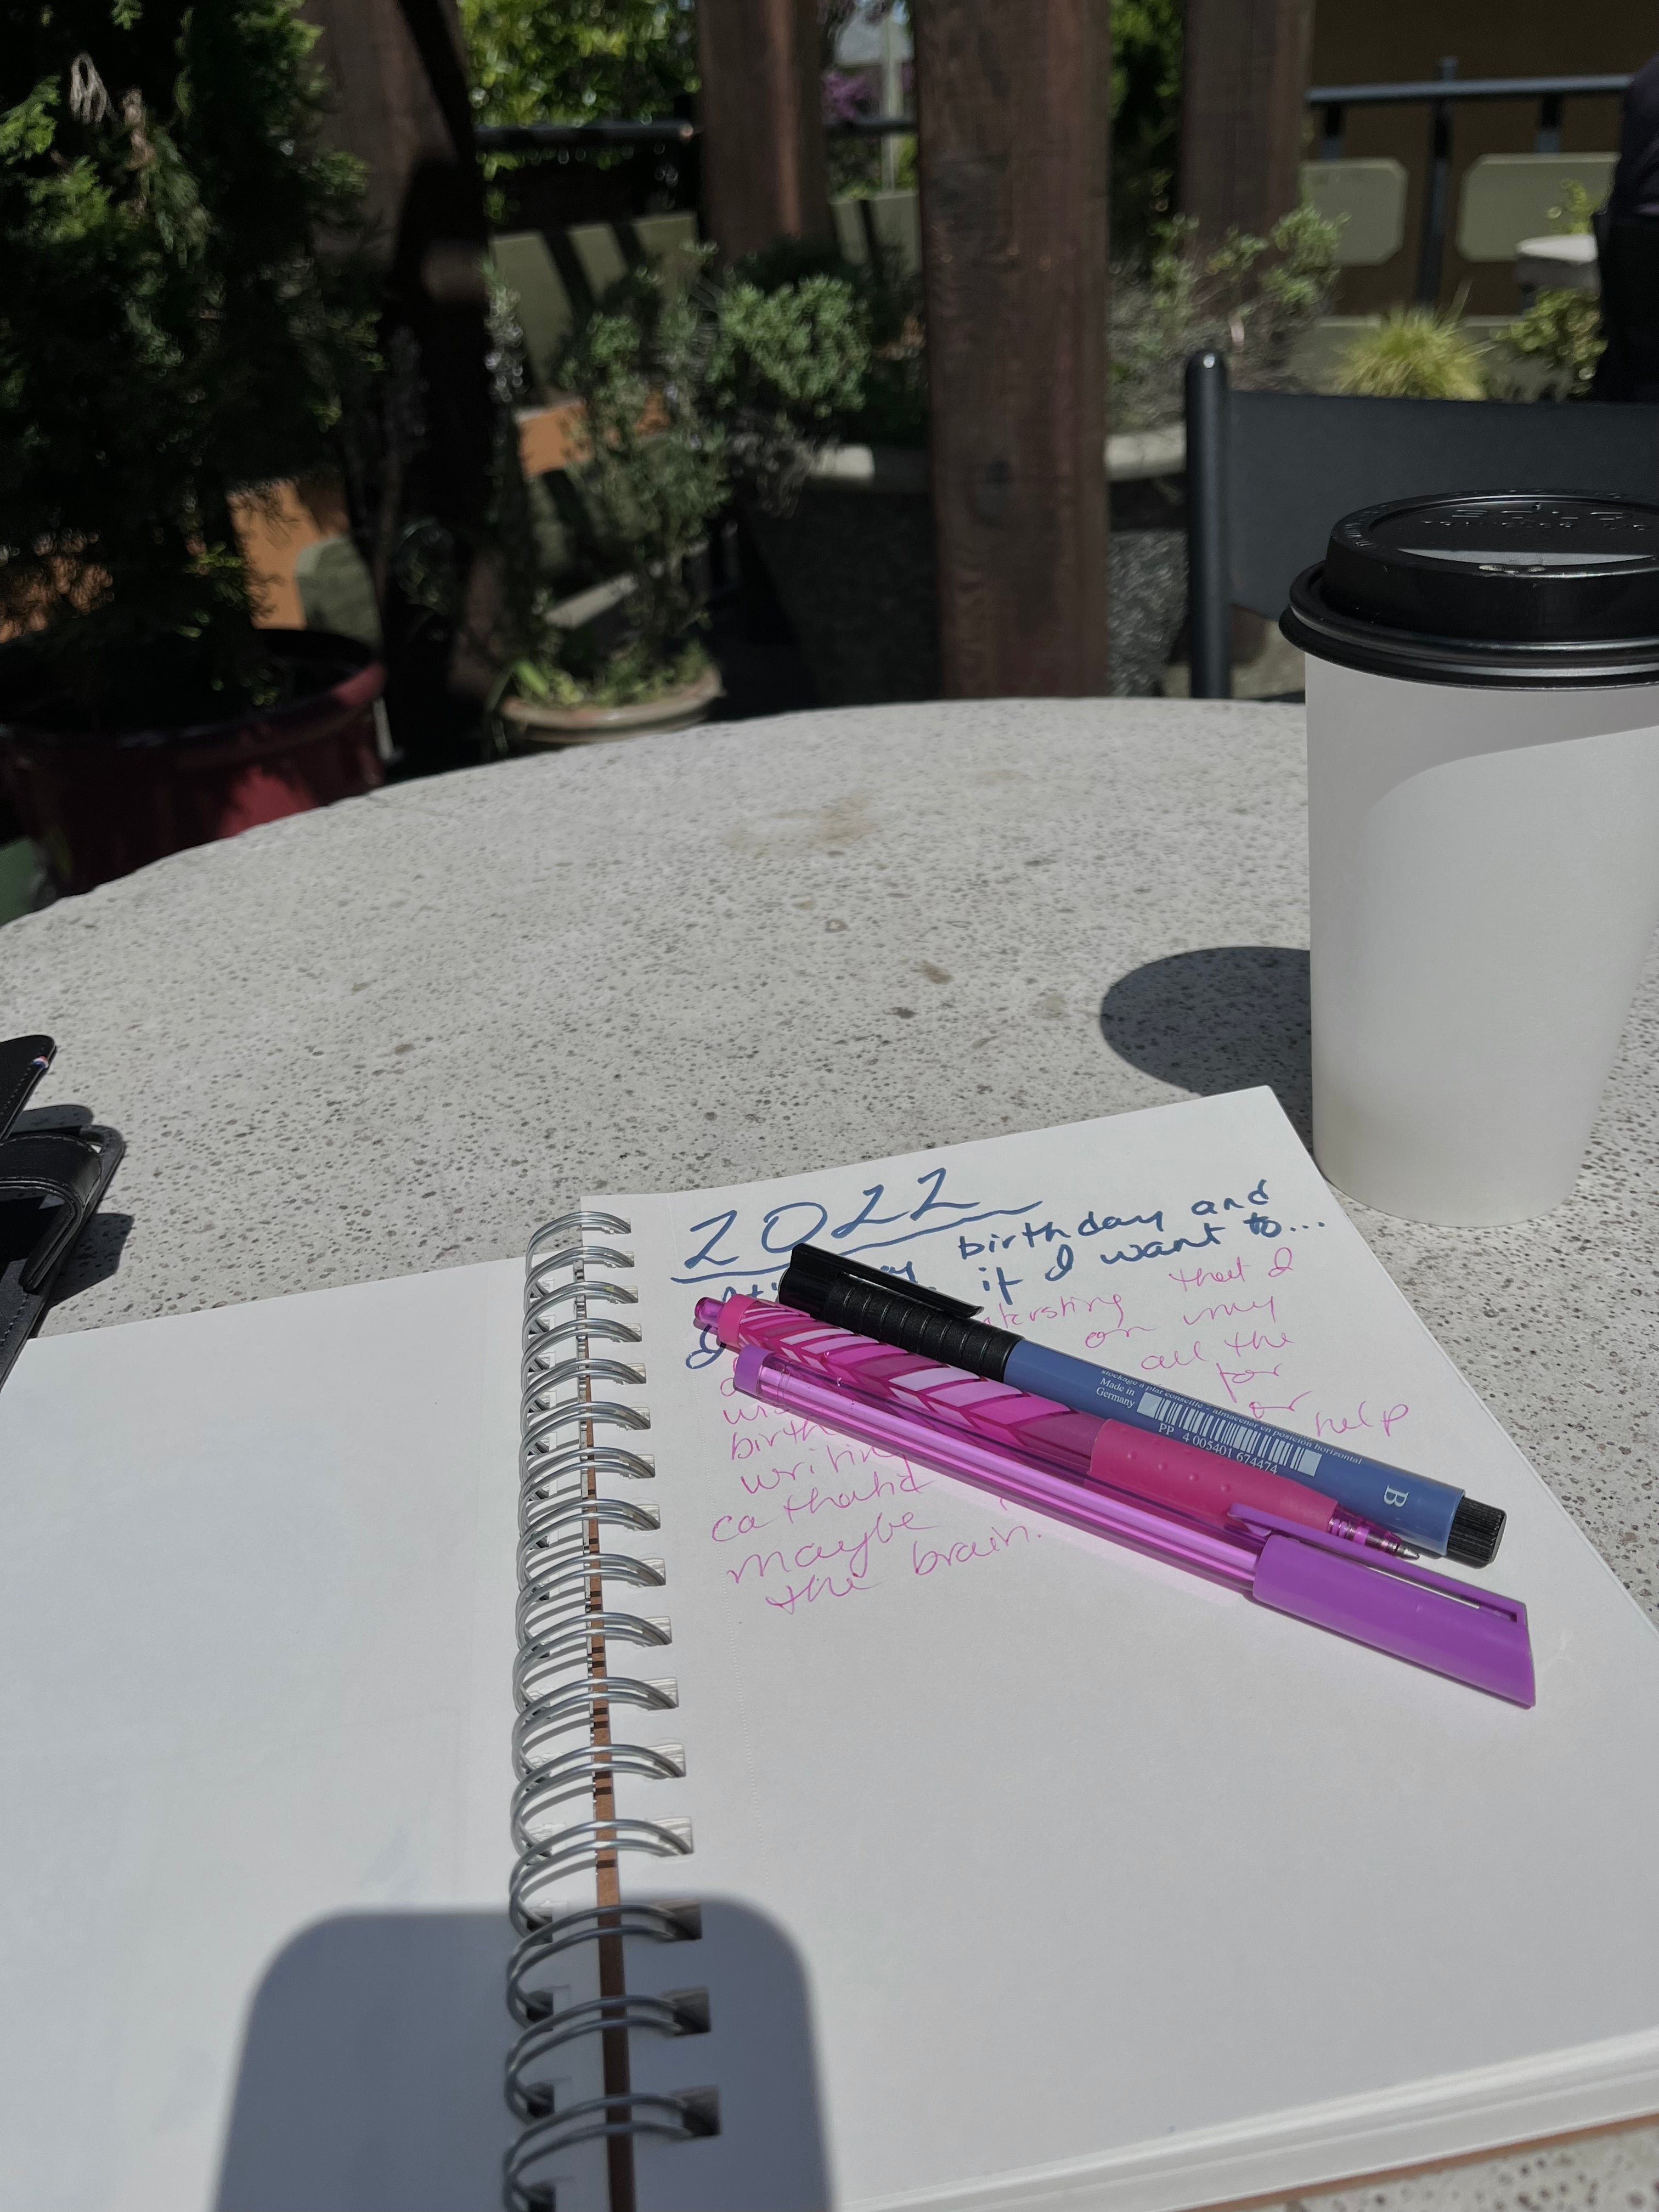 Journal on table with pink and purple pens and coffee